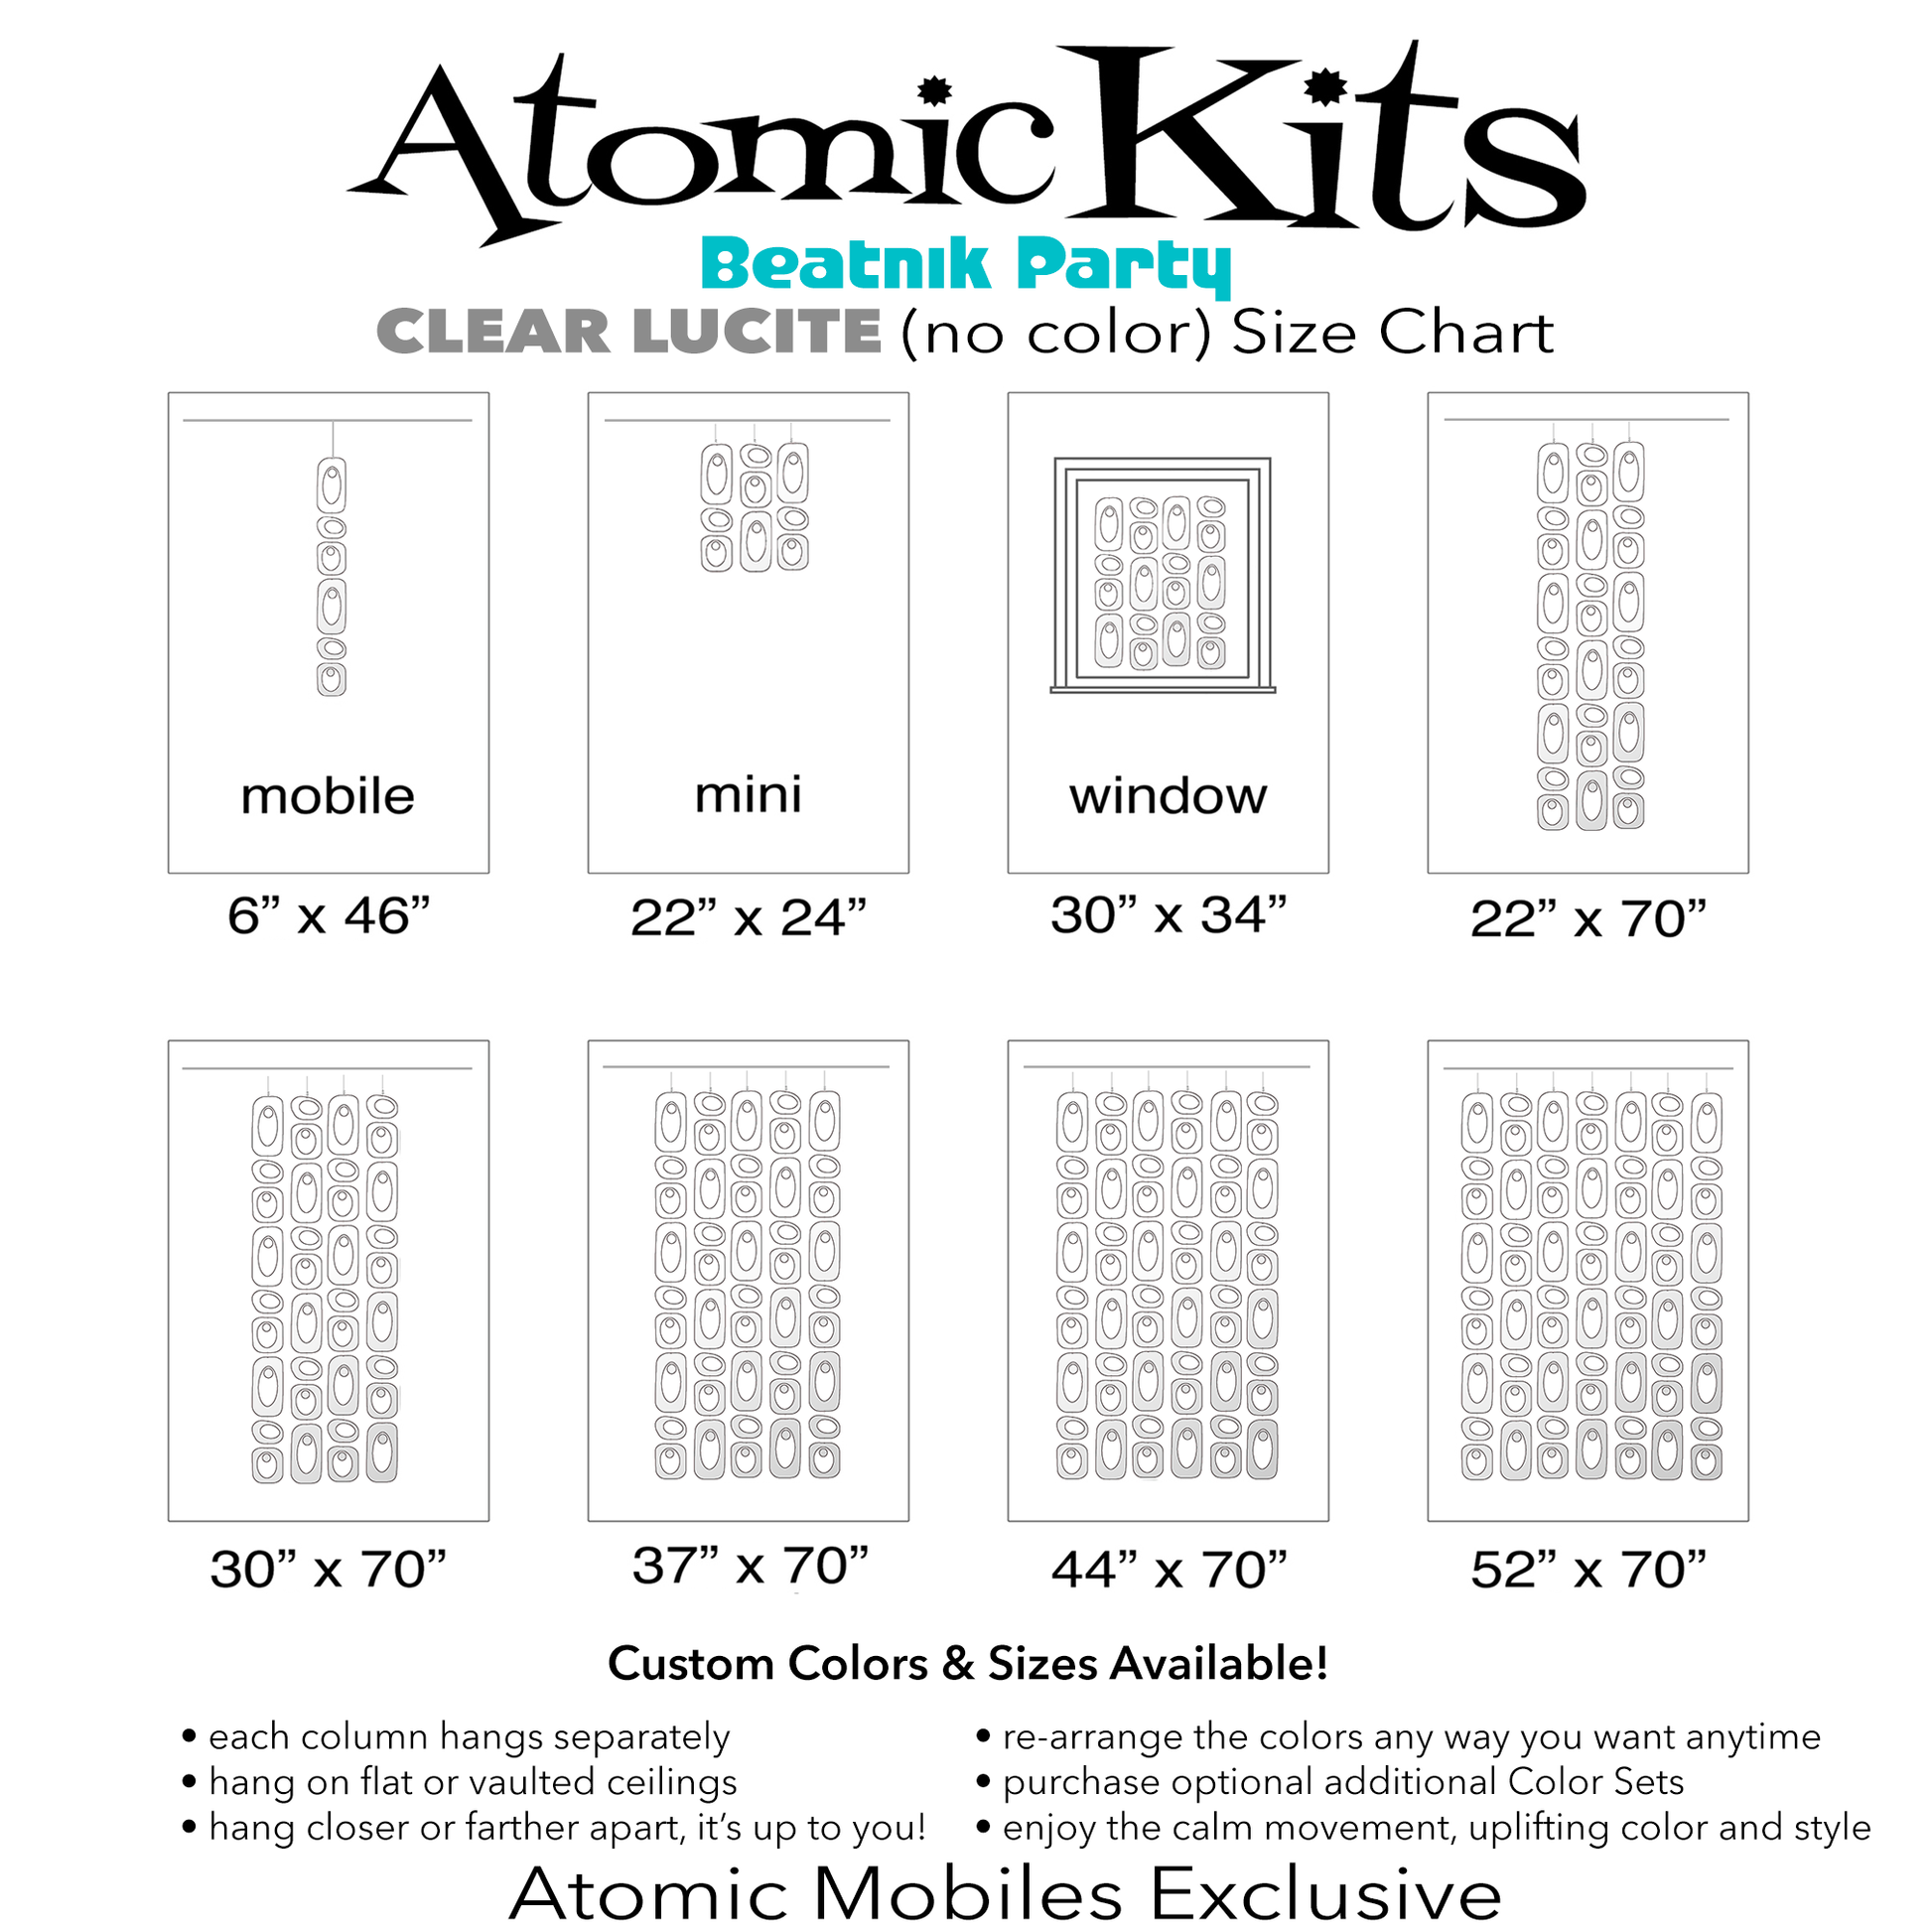 Size Chart for POP MOD clear lucite Beatnik Party Room Dividers, Curtains, Mobiles, and Wall Art DIY KIT by AtomicMobiles.com